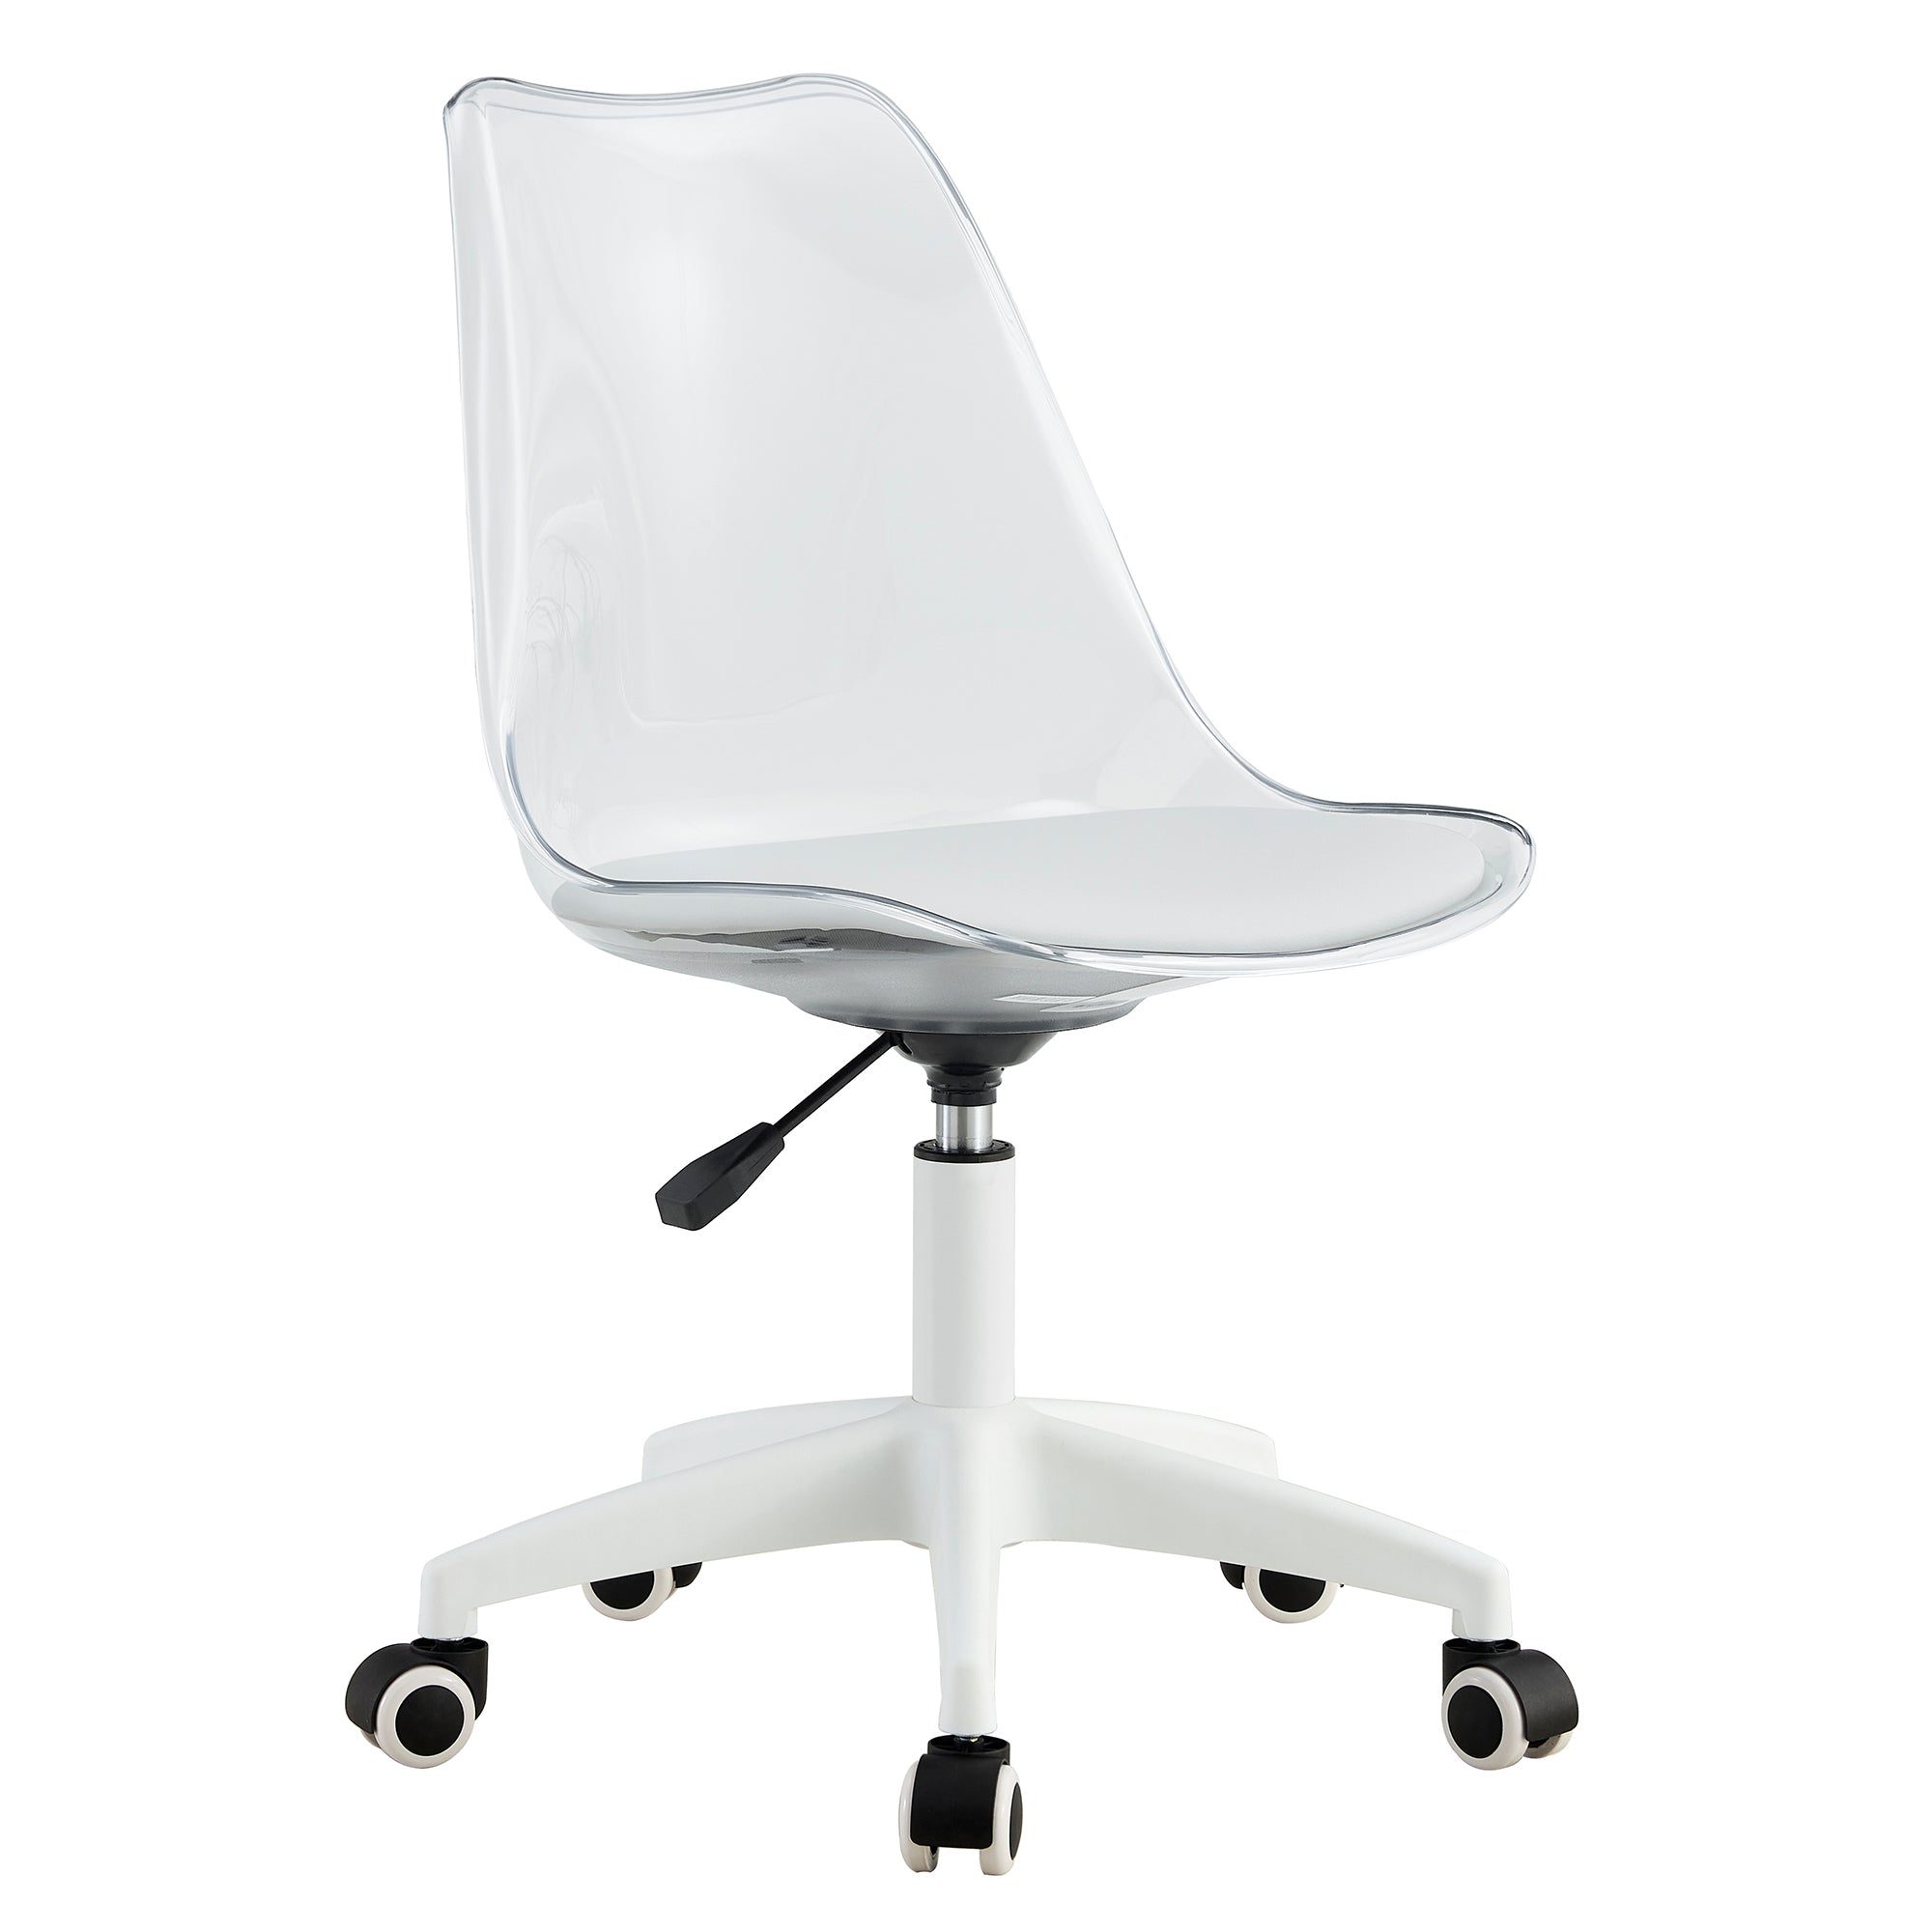 Modern Adjustable 360 °Swivel Chair with Wheels - Transparent Color